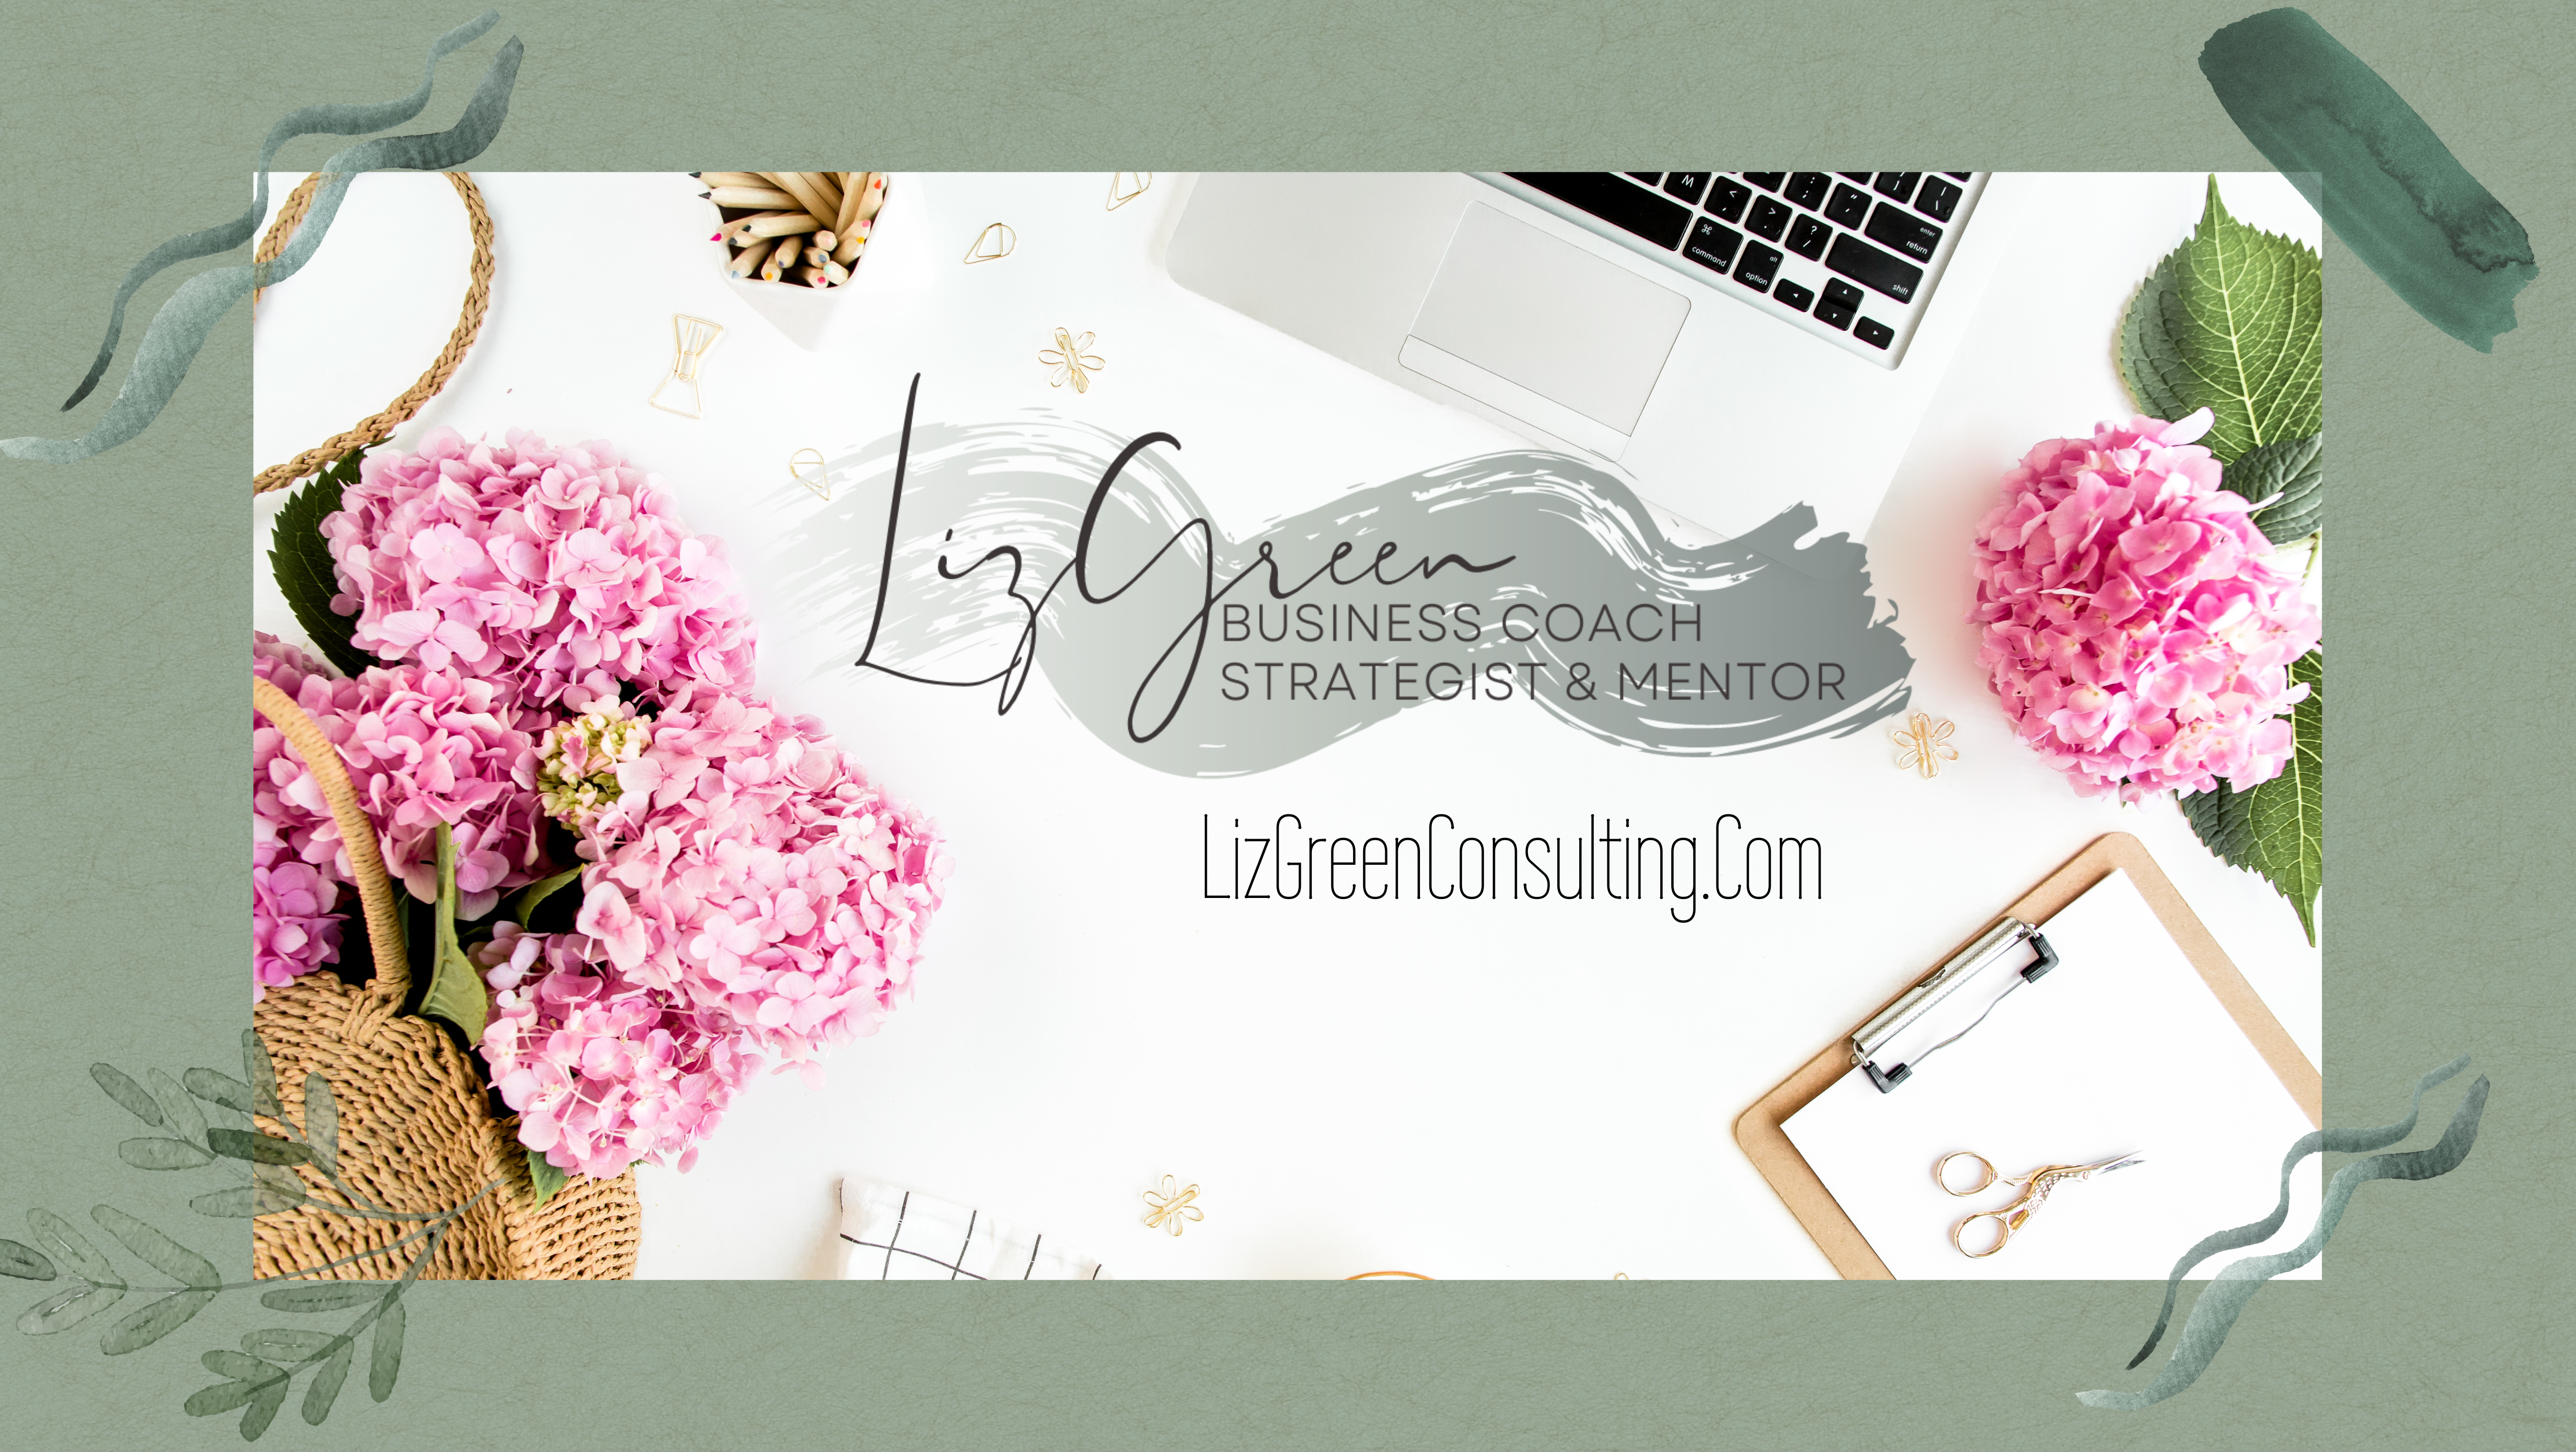 This website was a Liz Green Marketing - offering business coaching and strategy & Consulting and Ashley Alicea founder of www.brandelitemedia.com Collaboration.